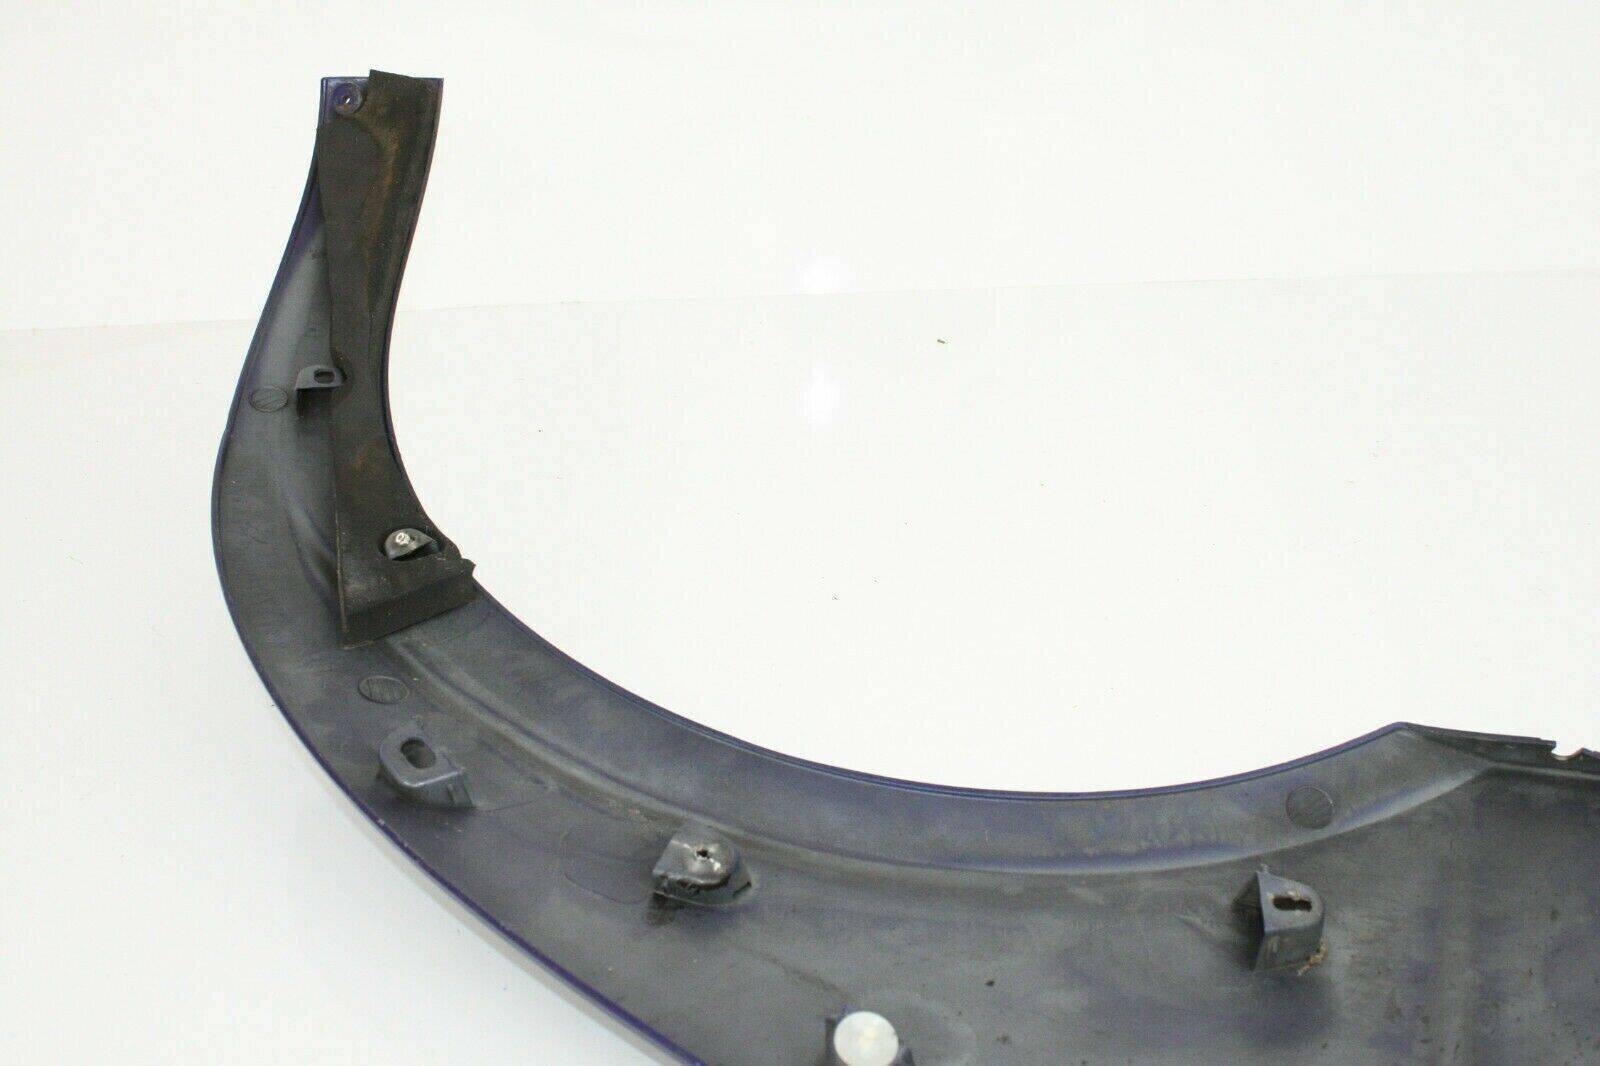 FORD-KA-SPORTKA-REAR-BUMPER-RIGHT-LOWER-SECTION-2003-TO-2008-175430905120-7